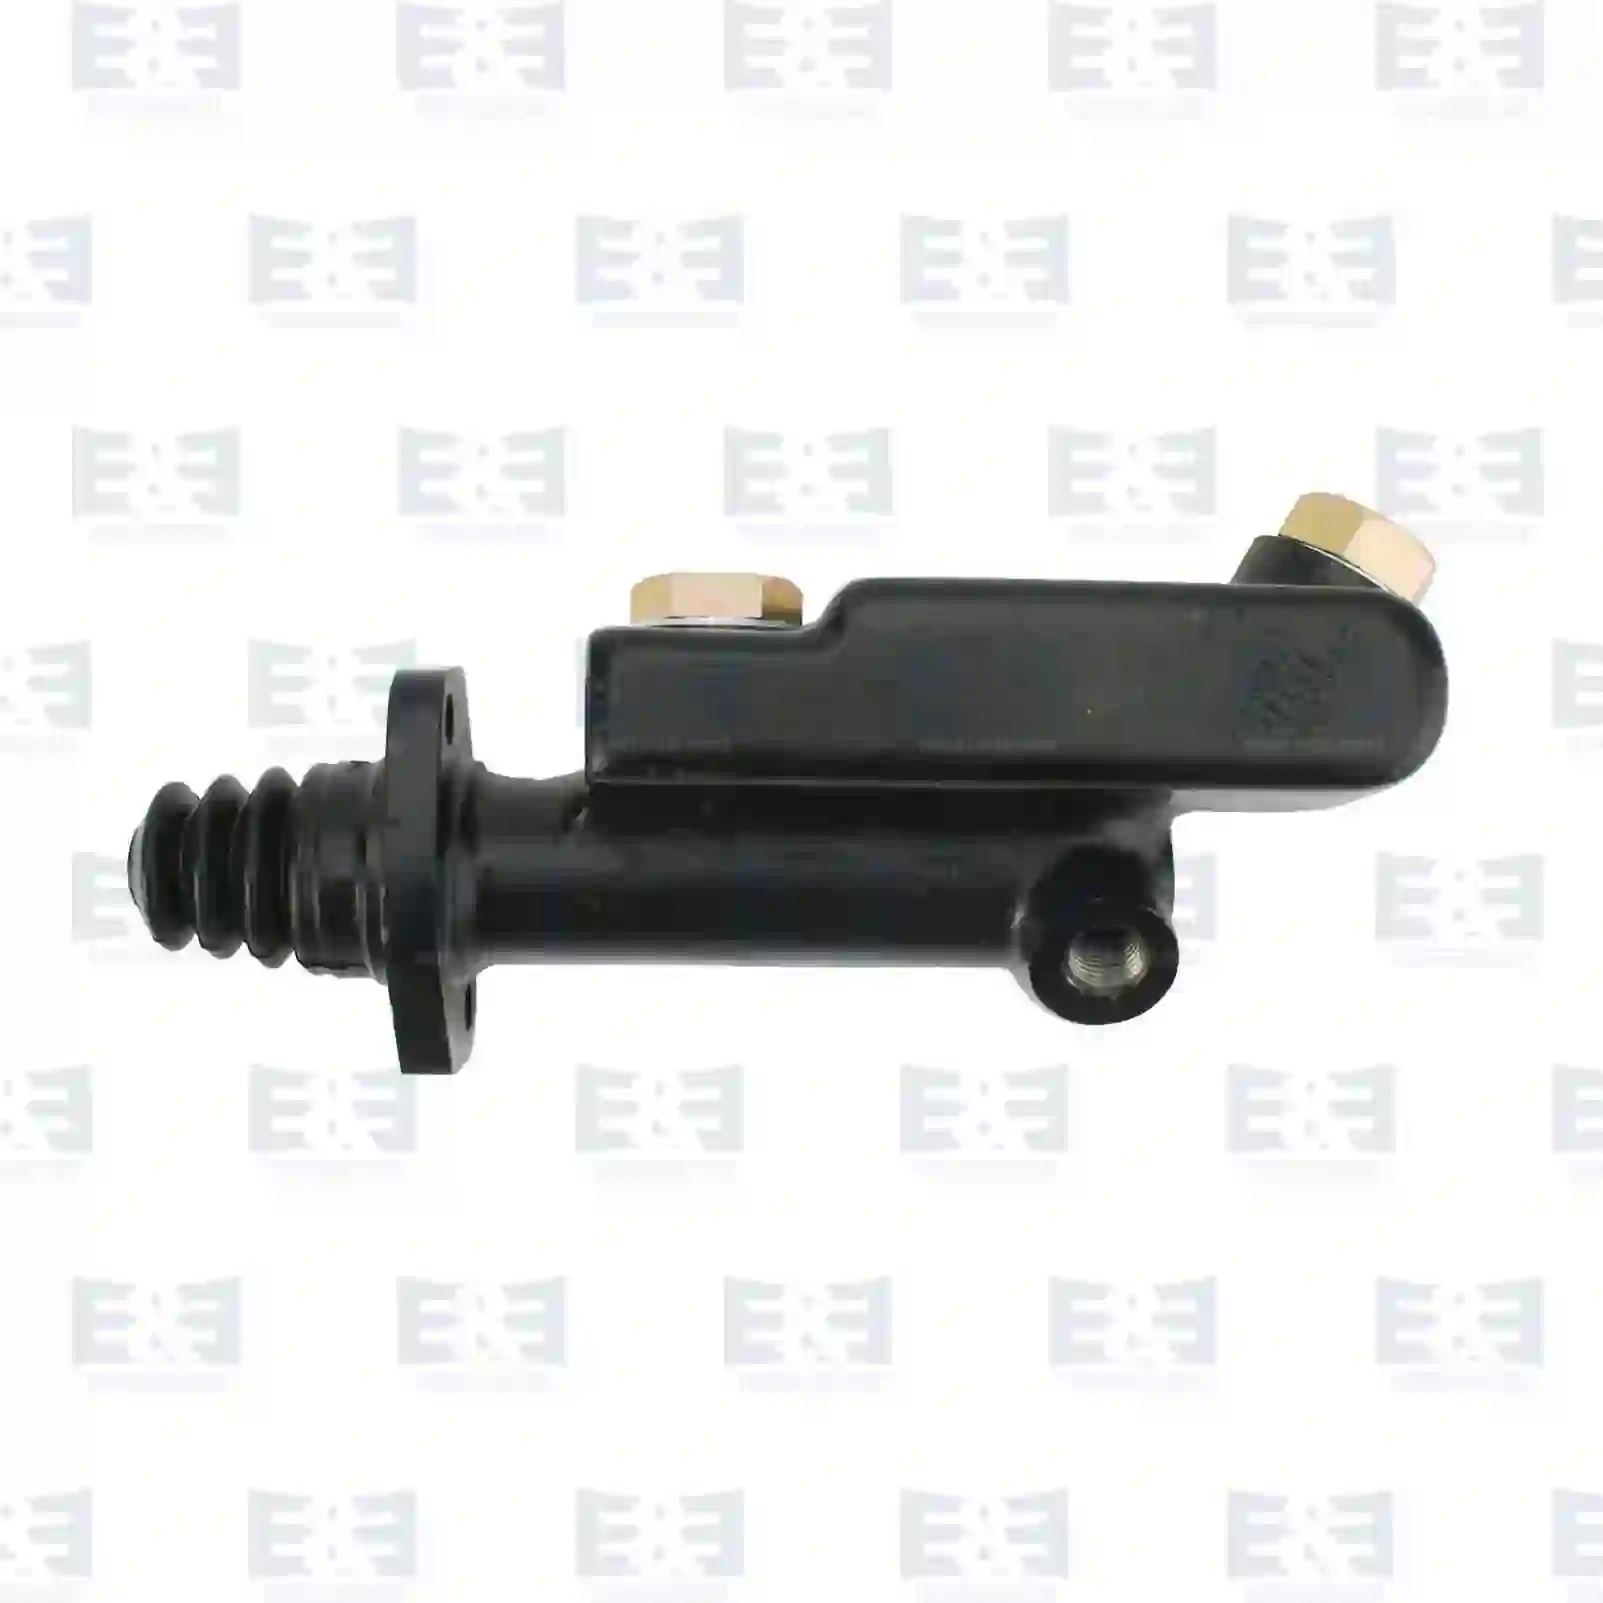 Clutch Cylinder Clutch cylinder, EE No 2E2289141 ,  oem no:81307156011, 81307156028, 81307156040, 5000243266, 5000275012 E&E Truck Spare Parts | Truck Spare Parts, Auotomotive Spare Parts